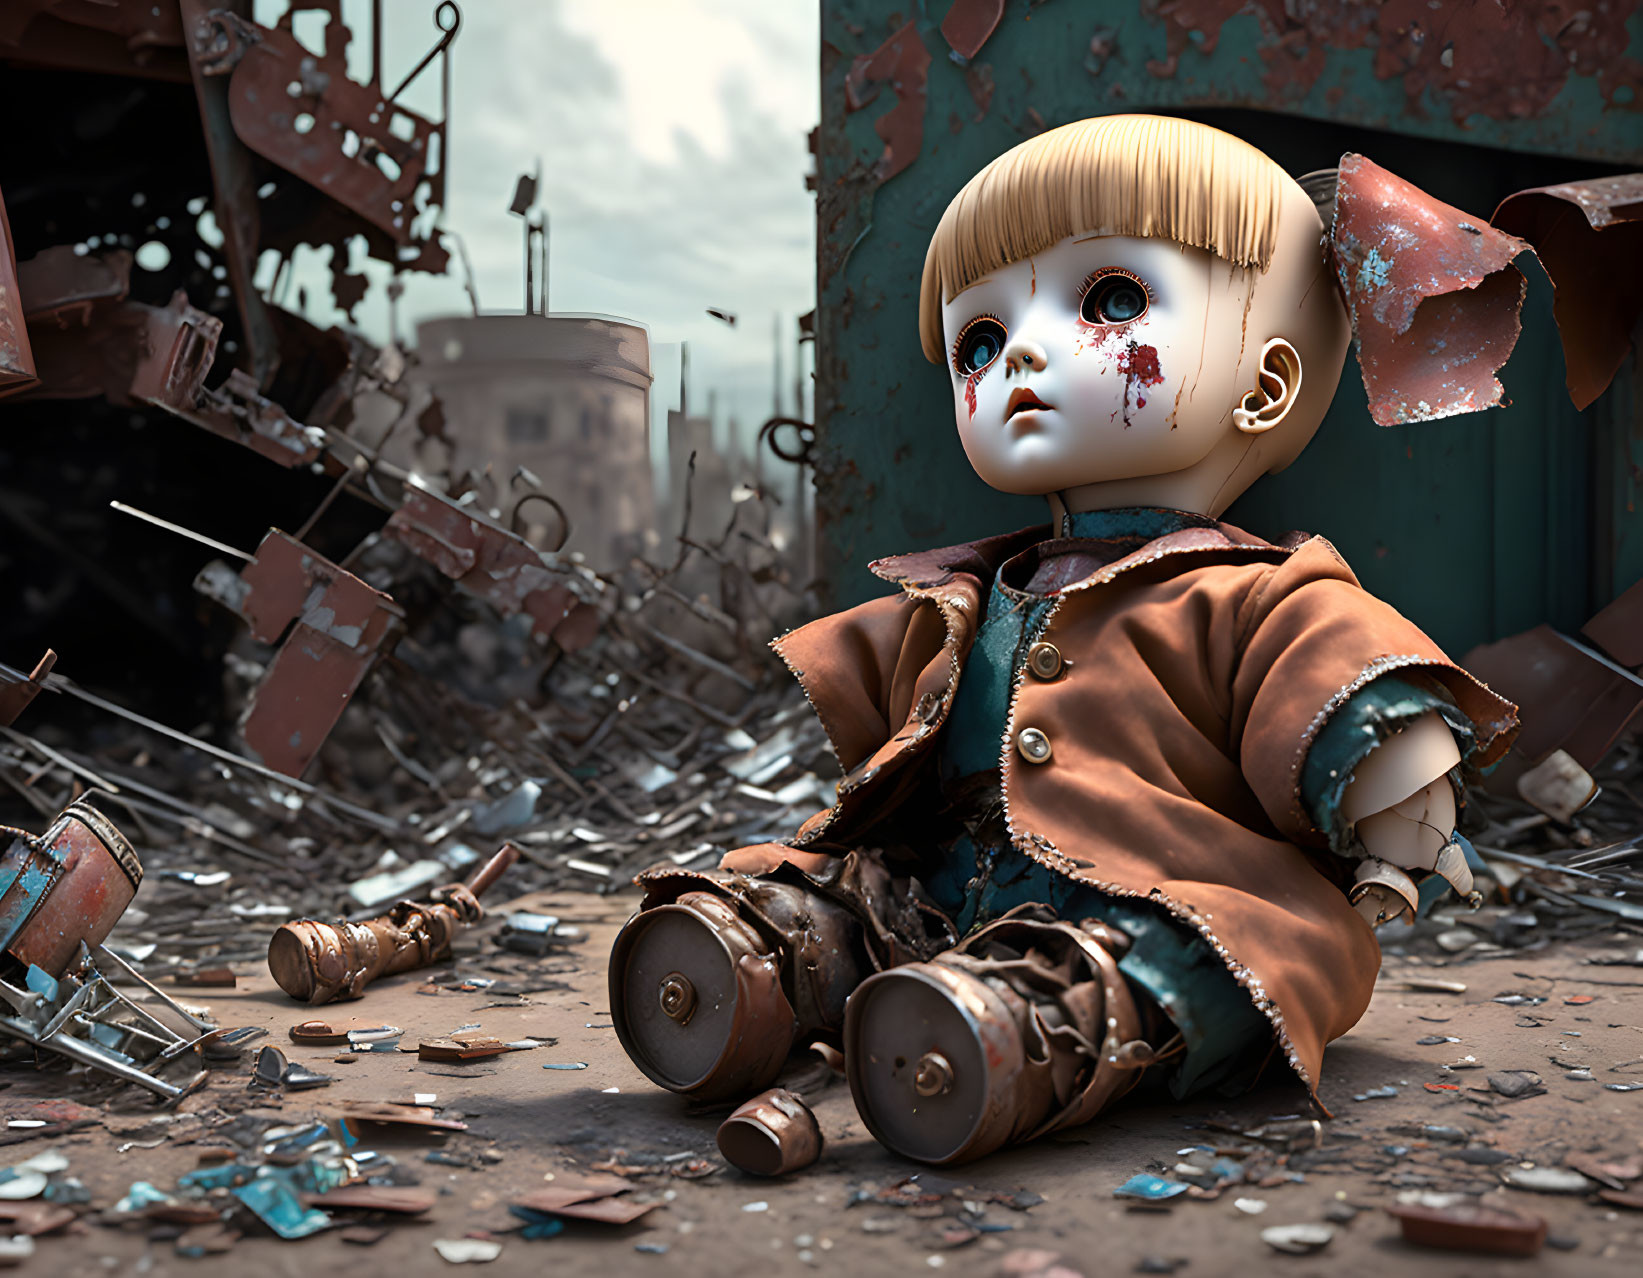 Large-headed mechanical doll in industrial setting with haunting expression.